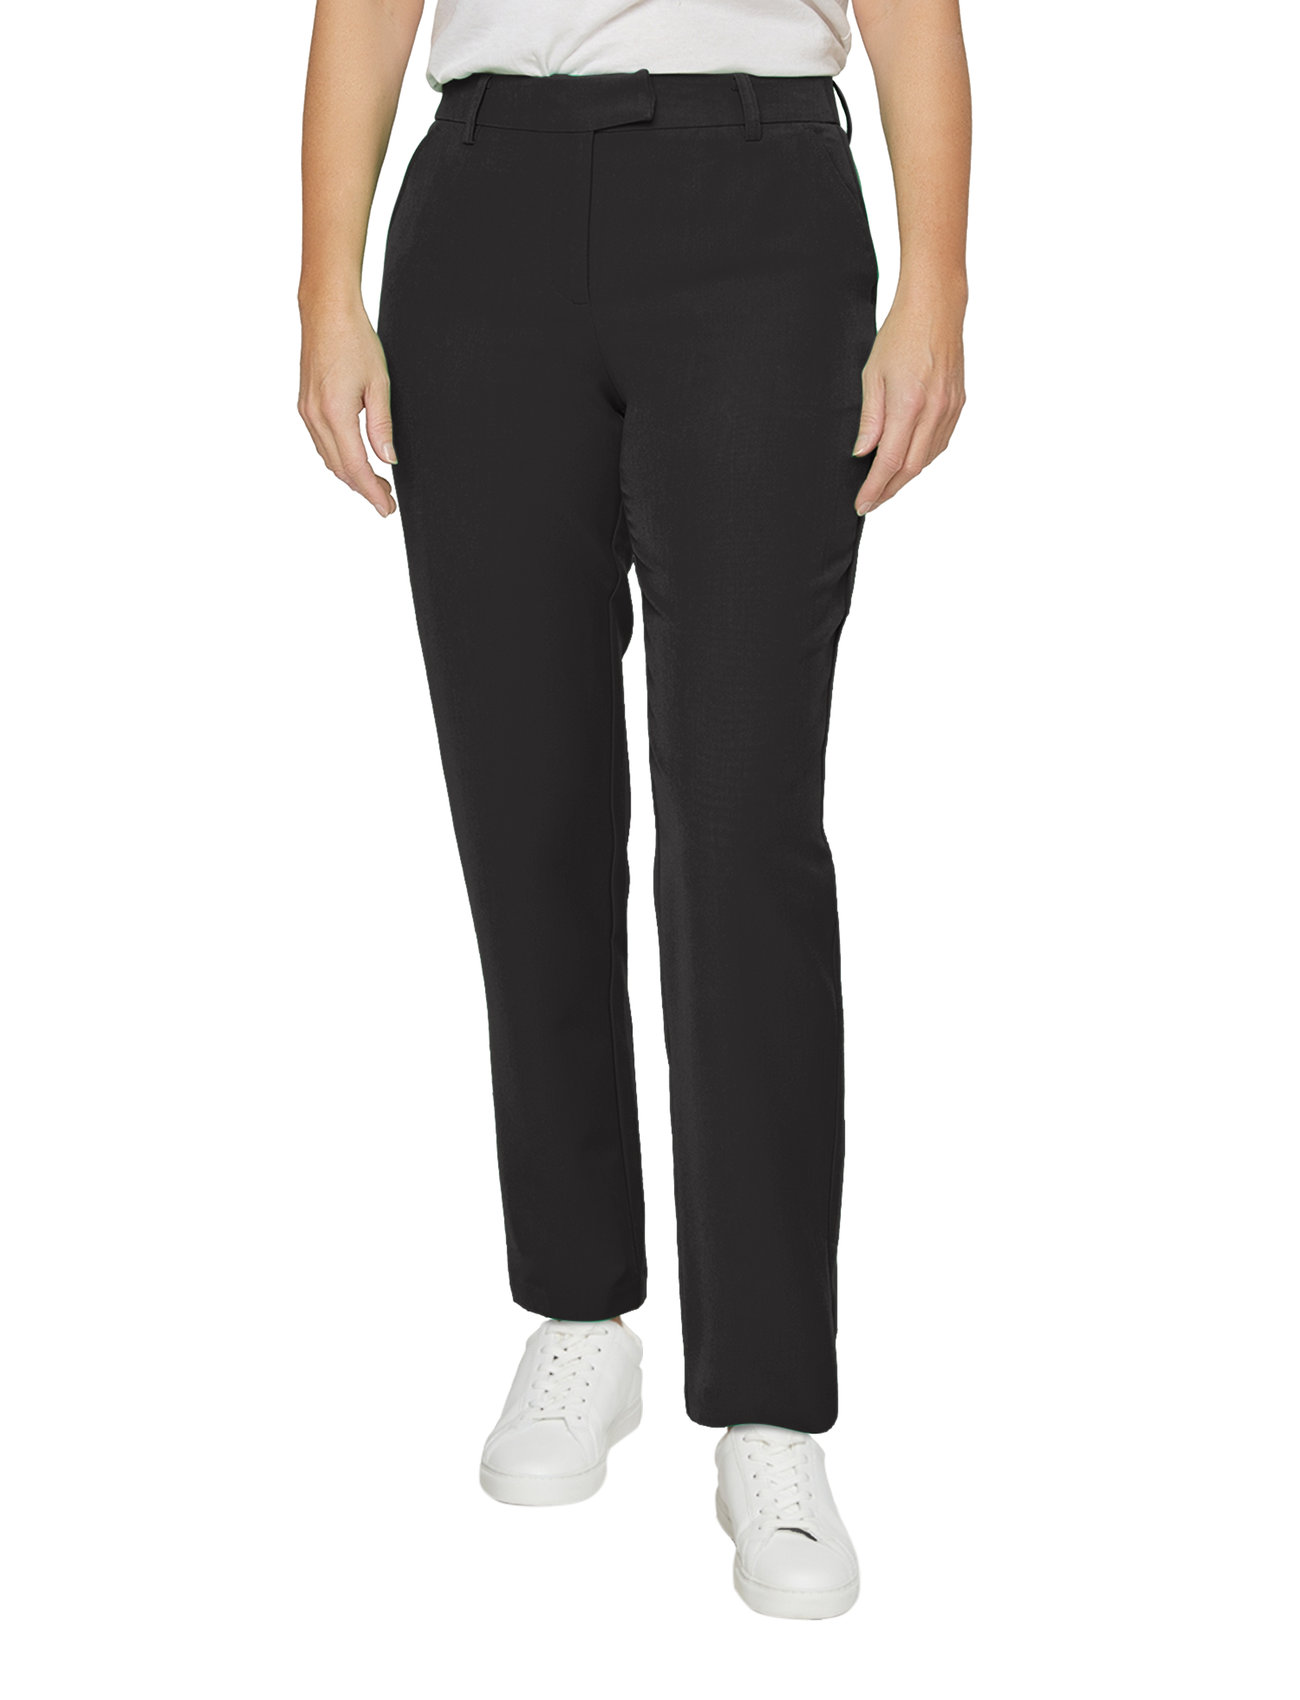 Brandtex - Suiting pants - tailored trousers - black - 1